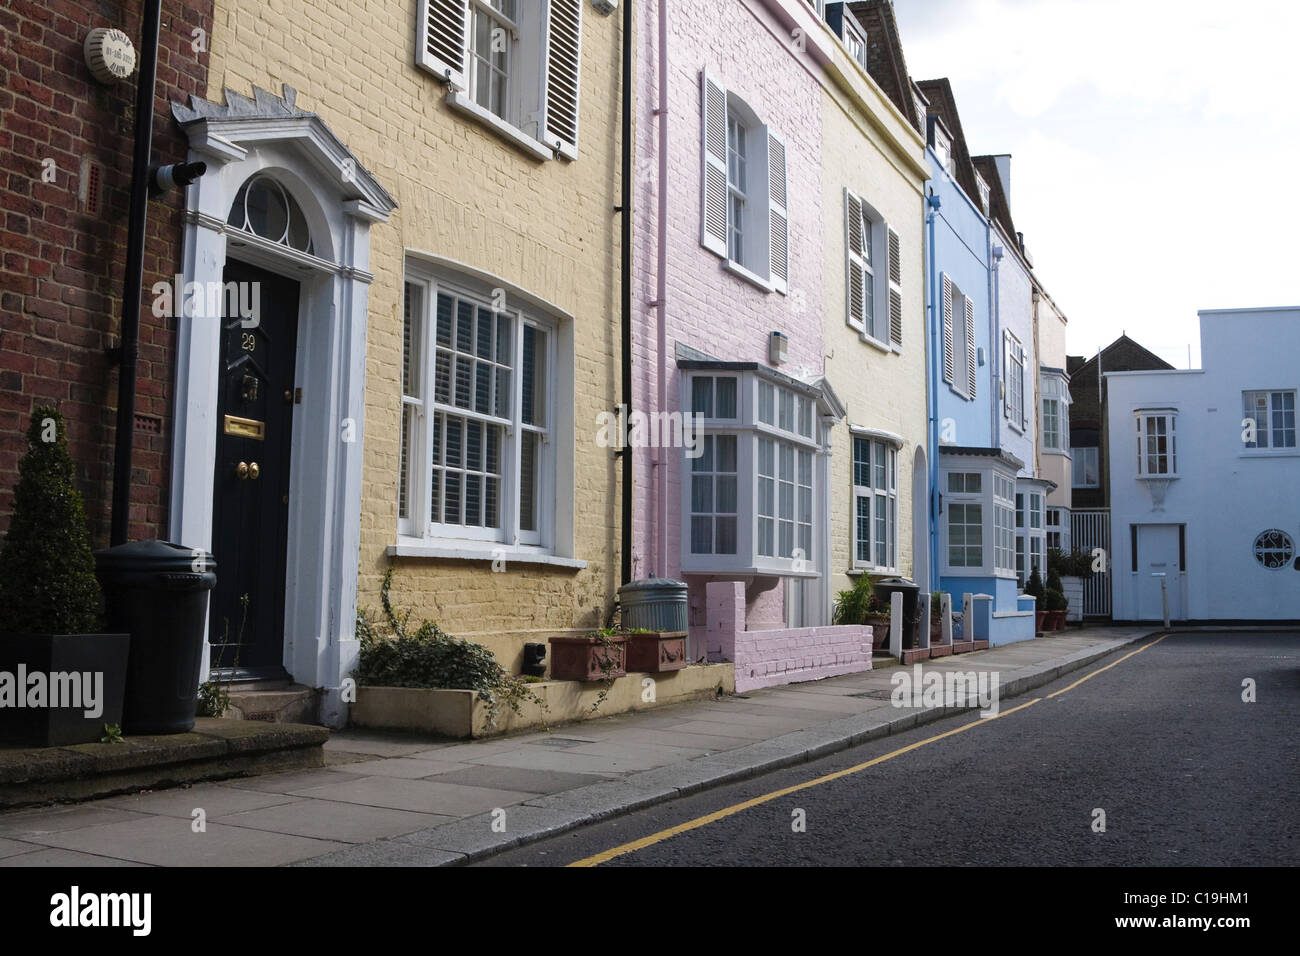 A row of brightly painted houses in Chelsea, London, UK Stock Photo